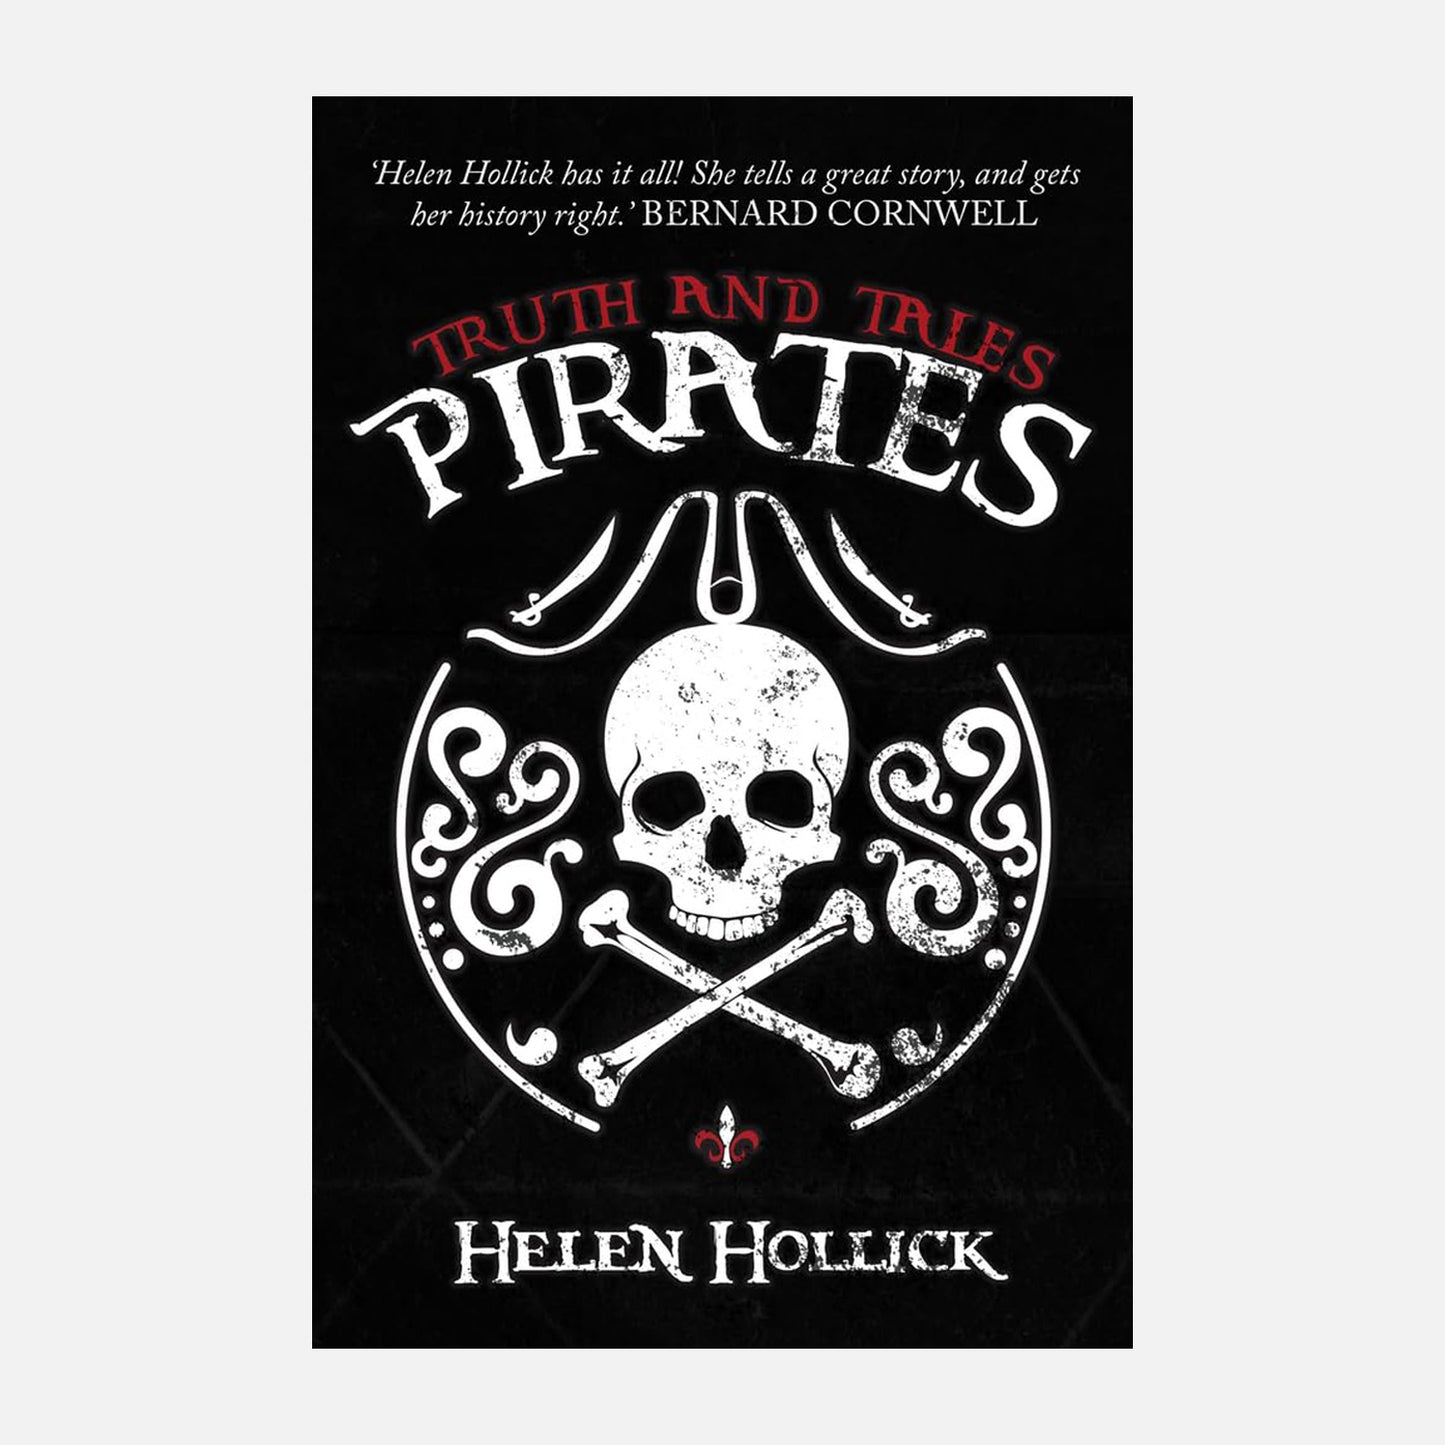 Pirates: Truth and Tales by Helen Hollick. "Helen Hollick has it all! She tells a great story and gets her history right" Bernard Cornwell. Detailed Skull and Crossbones on black backdrop.